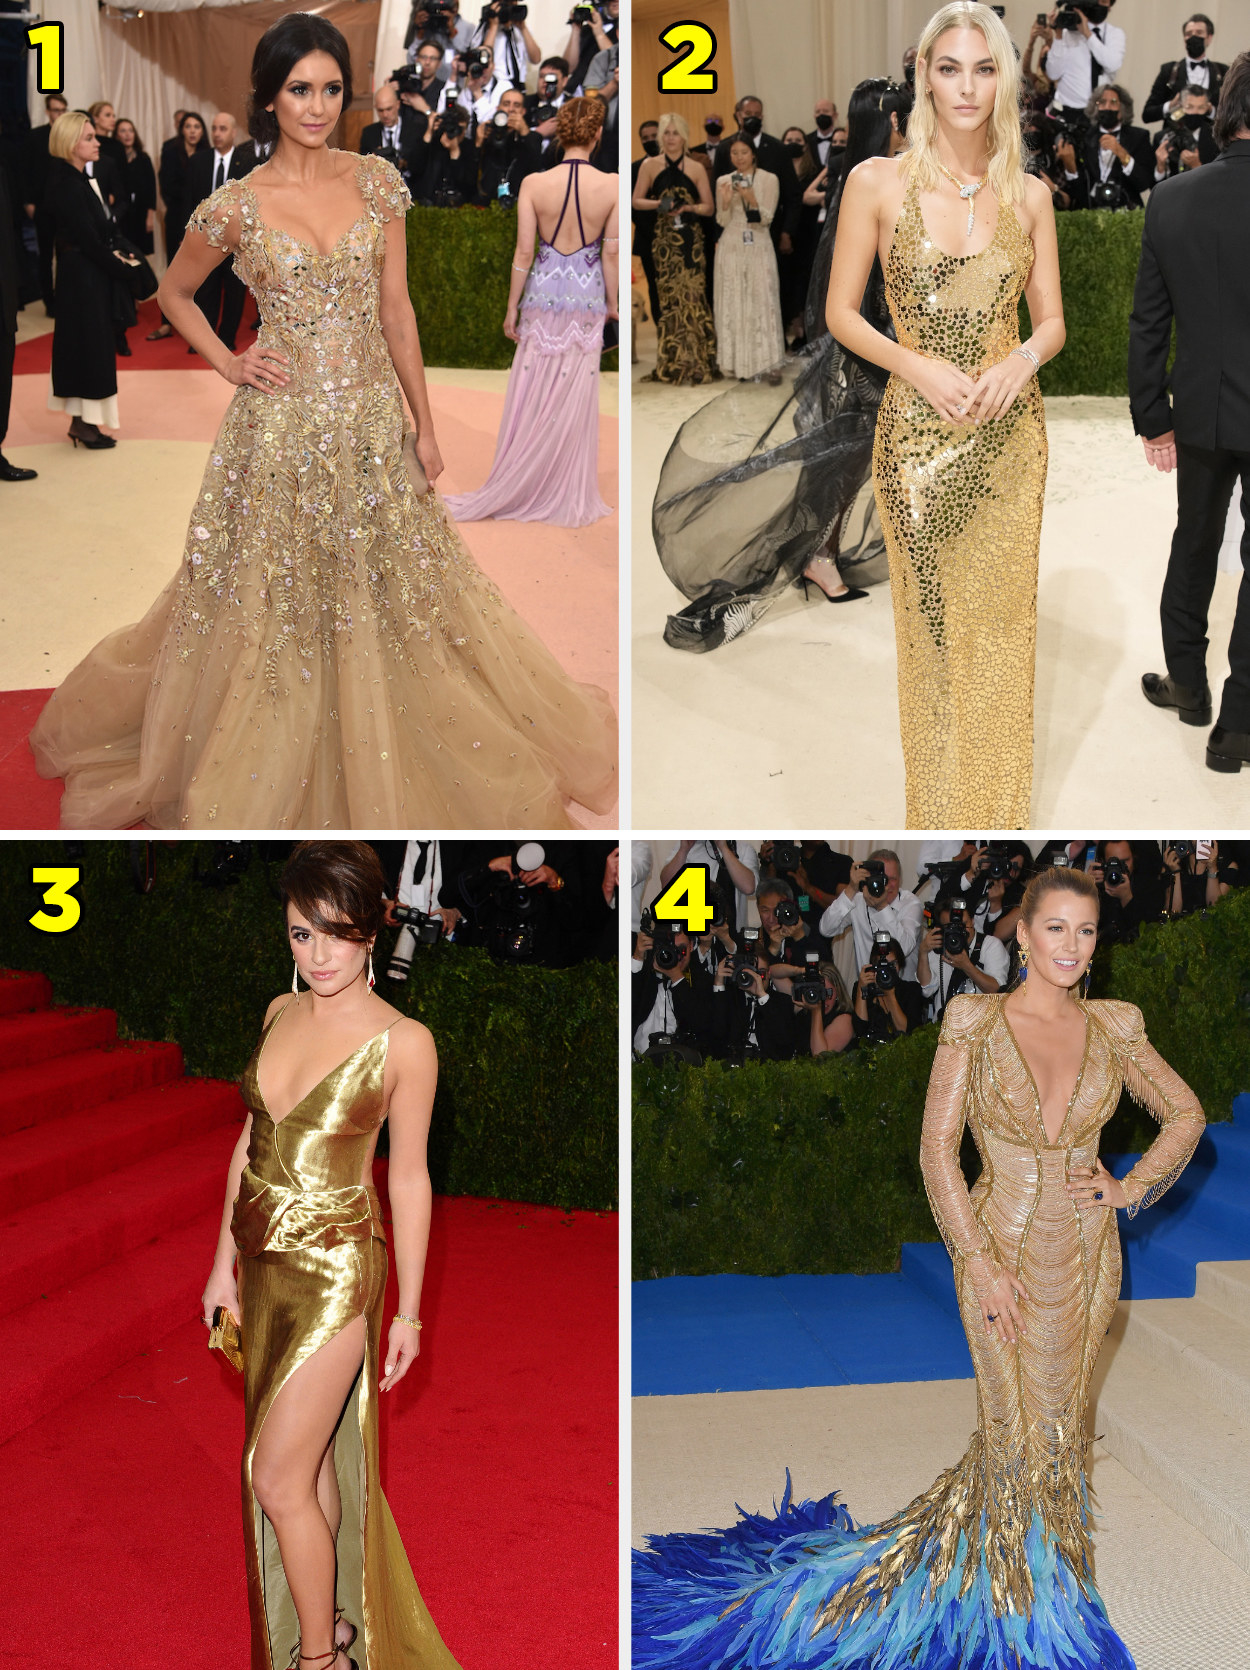 1. A ballgown style gown covered in jewels. 2. a sheath style dress that shines. 3. A shiny sleevless gown with a large thigh slit. 4. A longsleeved gown with shoulder pads and different colored feathers at the skirt.